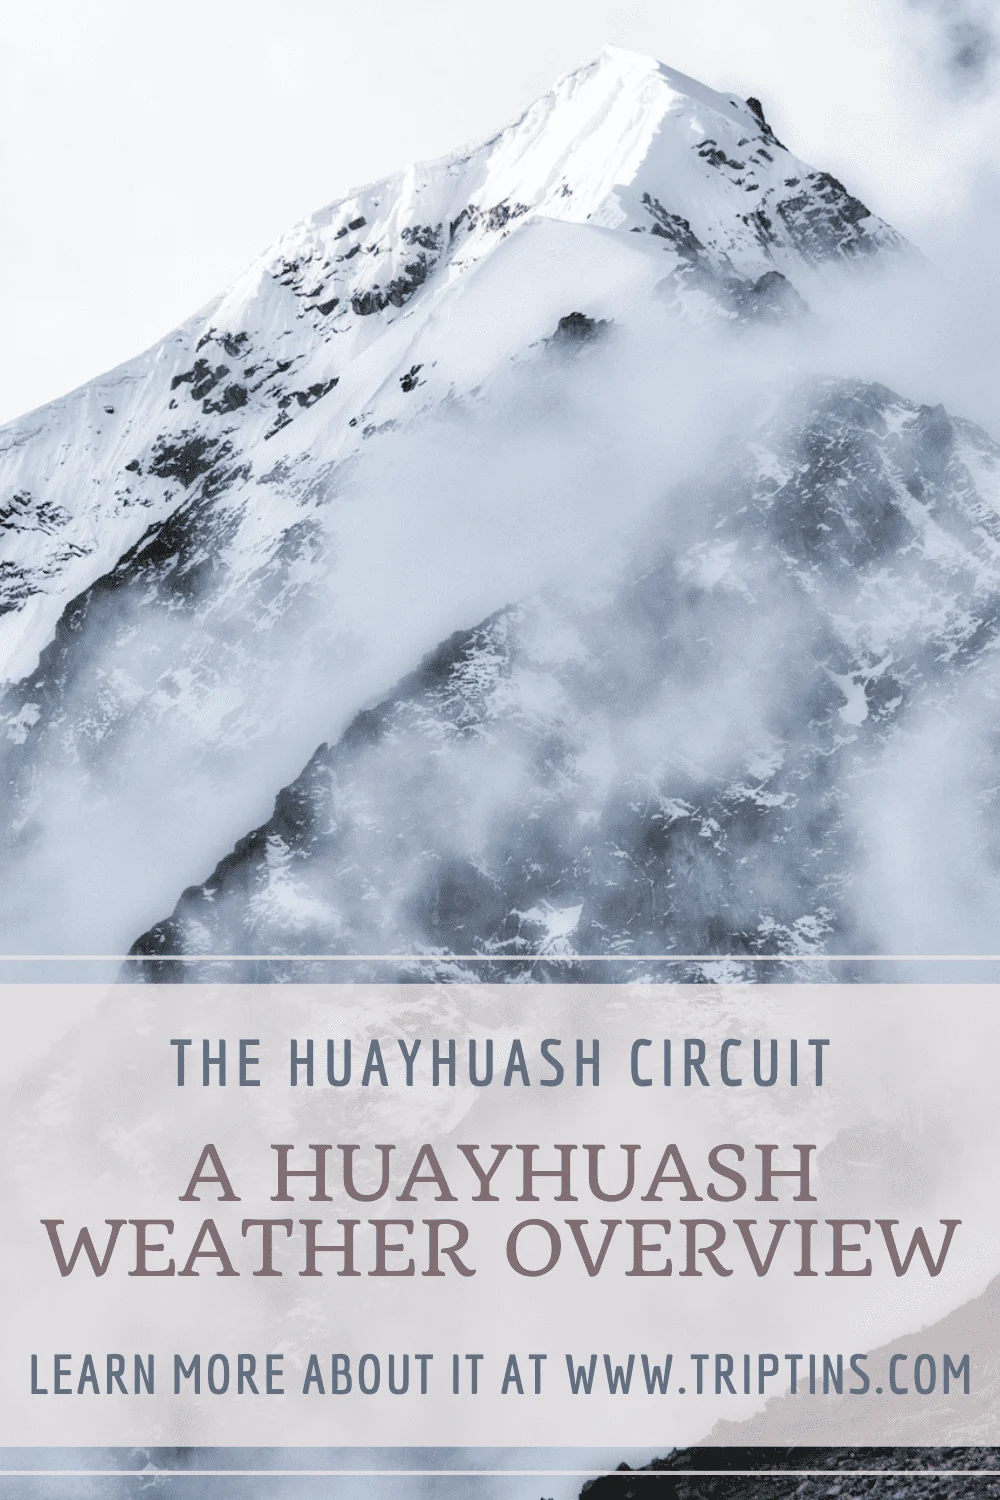 Best Time for a Huayhuash Trek